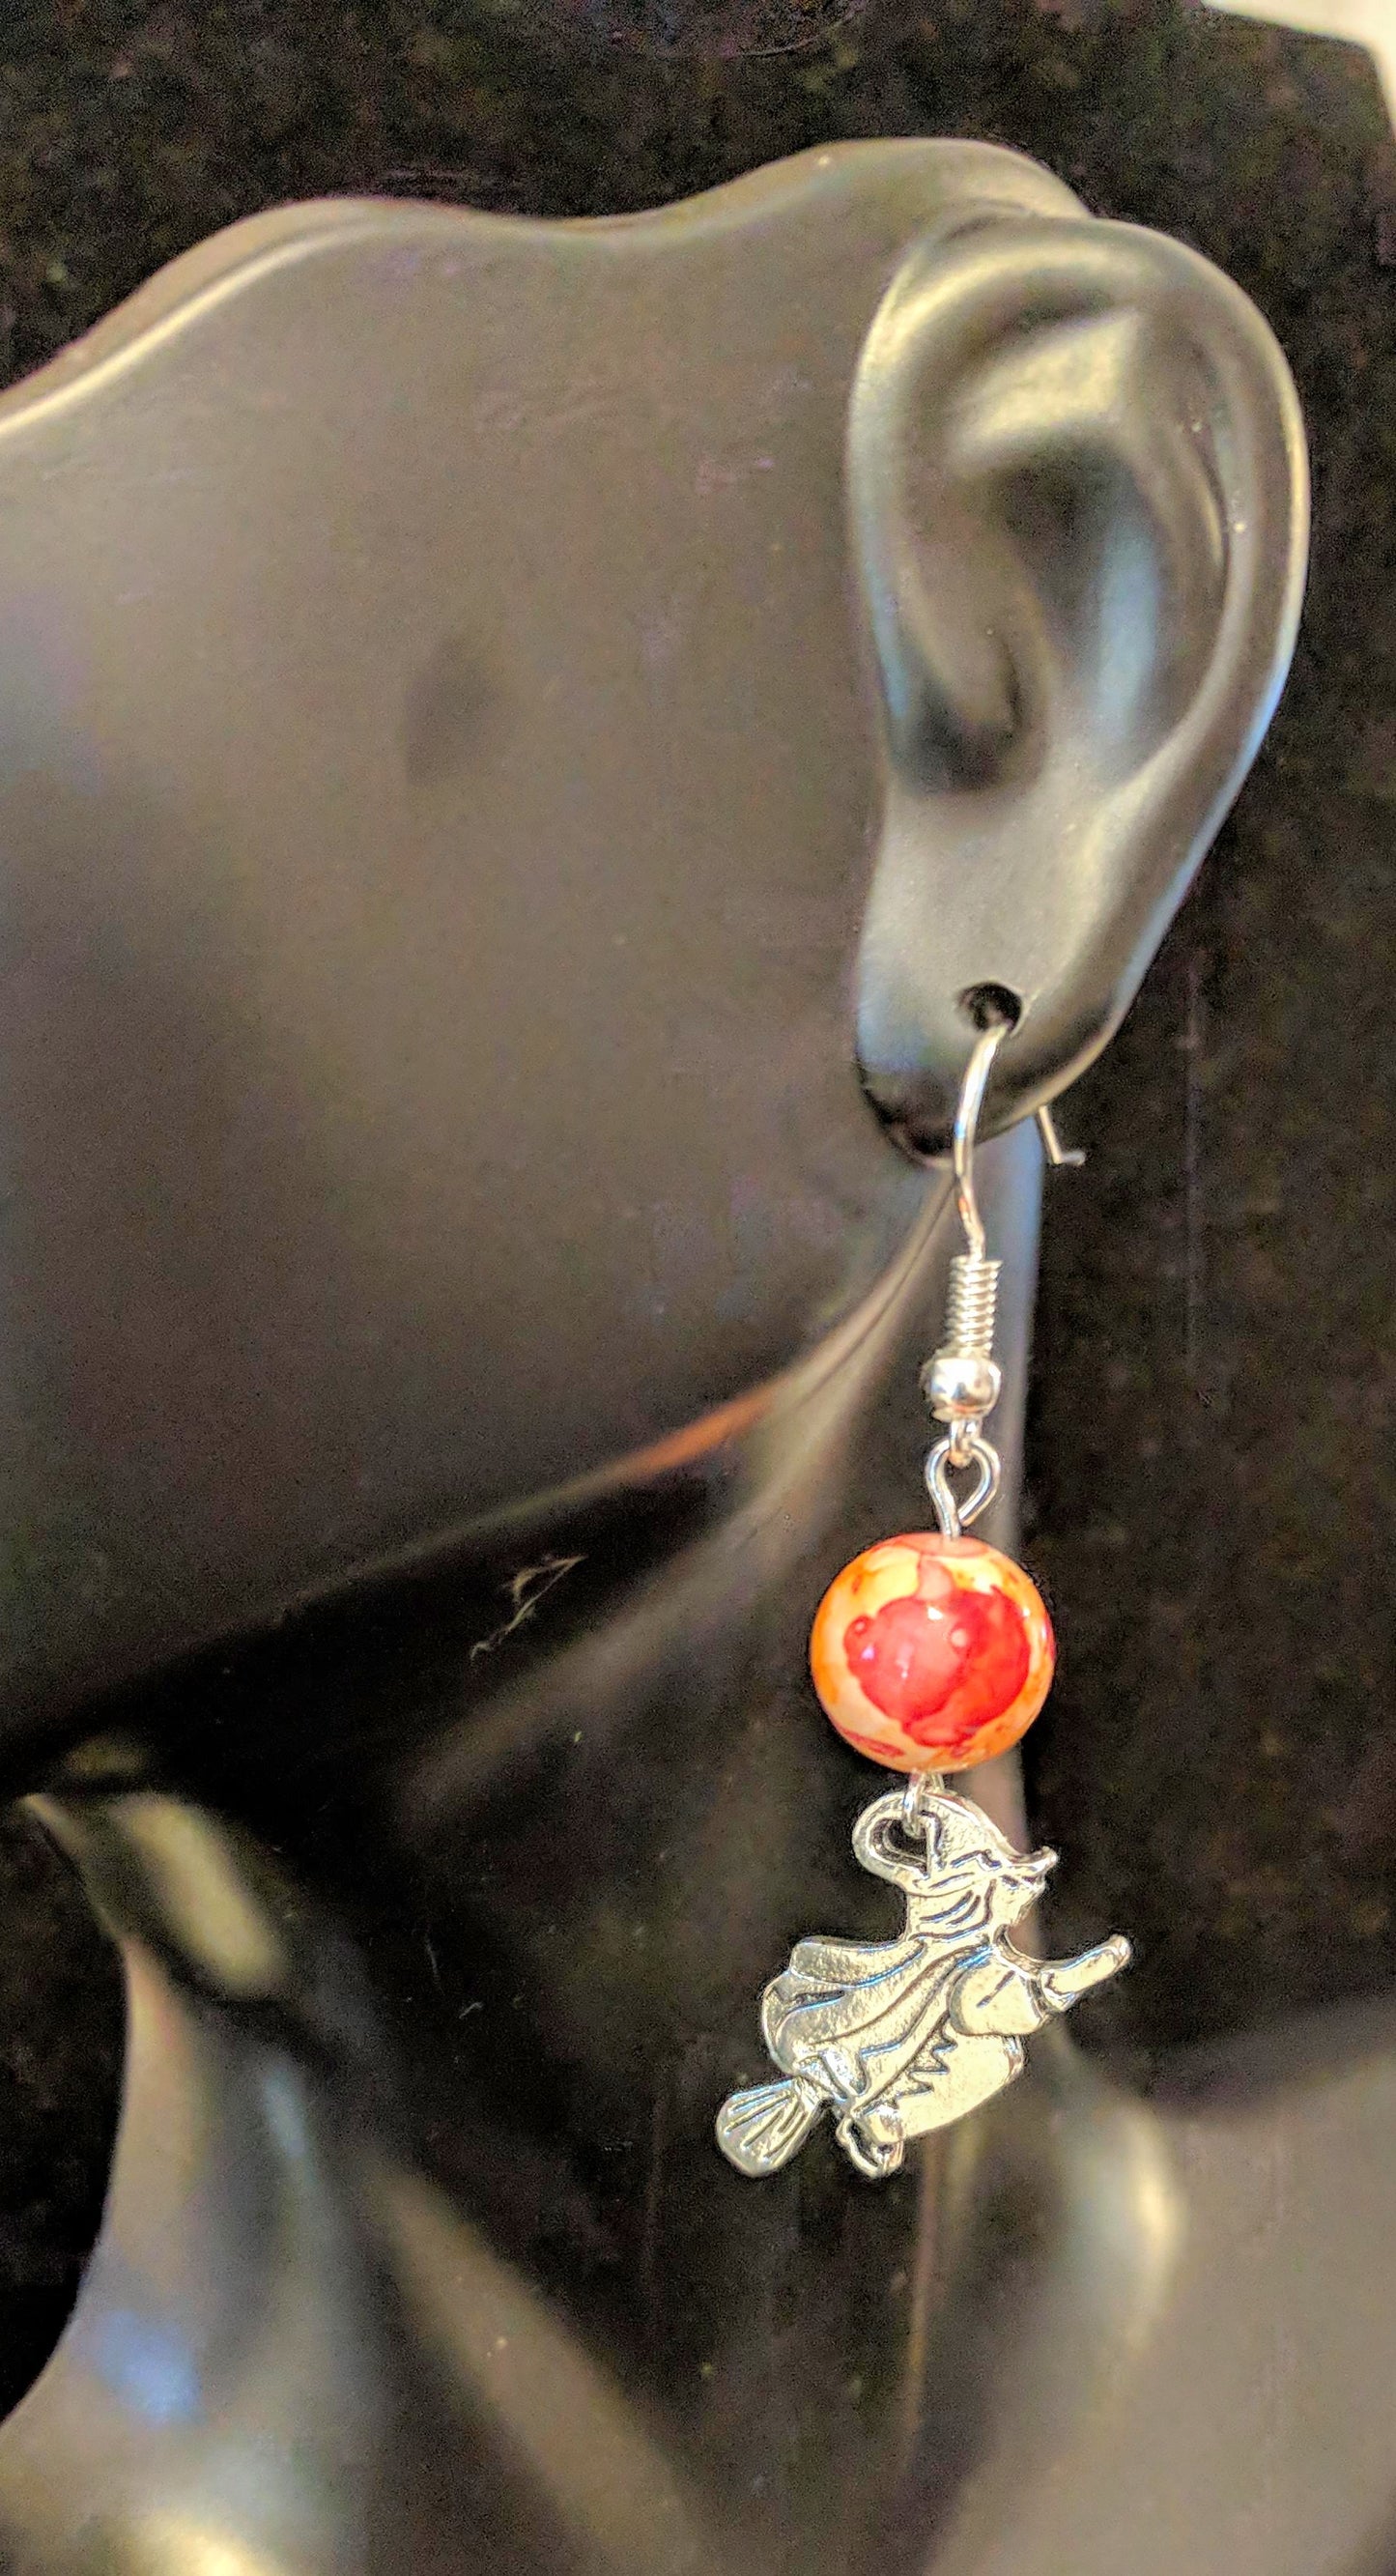 Halloween earrings. A witch and a her familiar! Beaded Earrings Dragon & Wolf Designs   